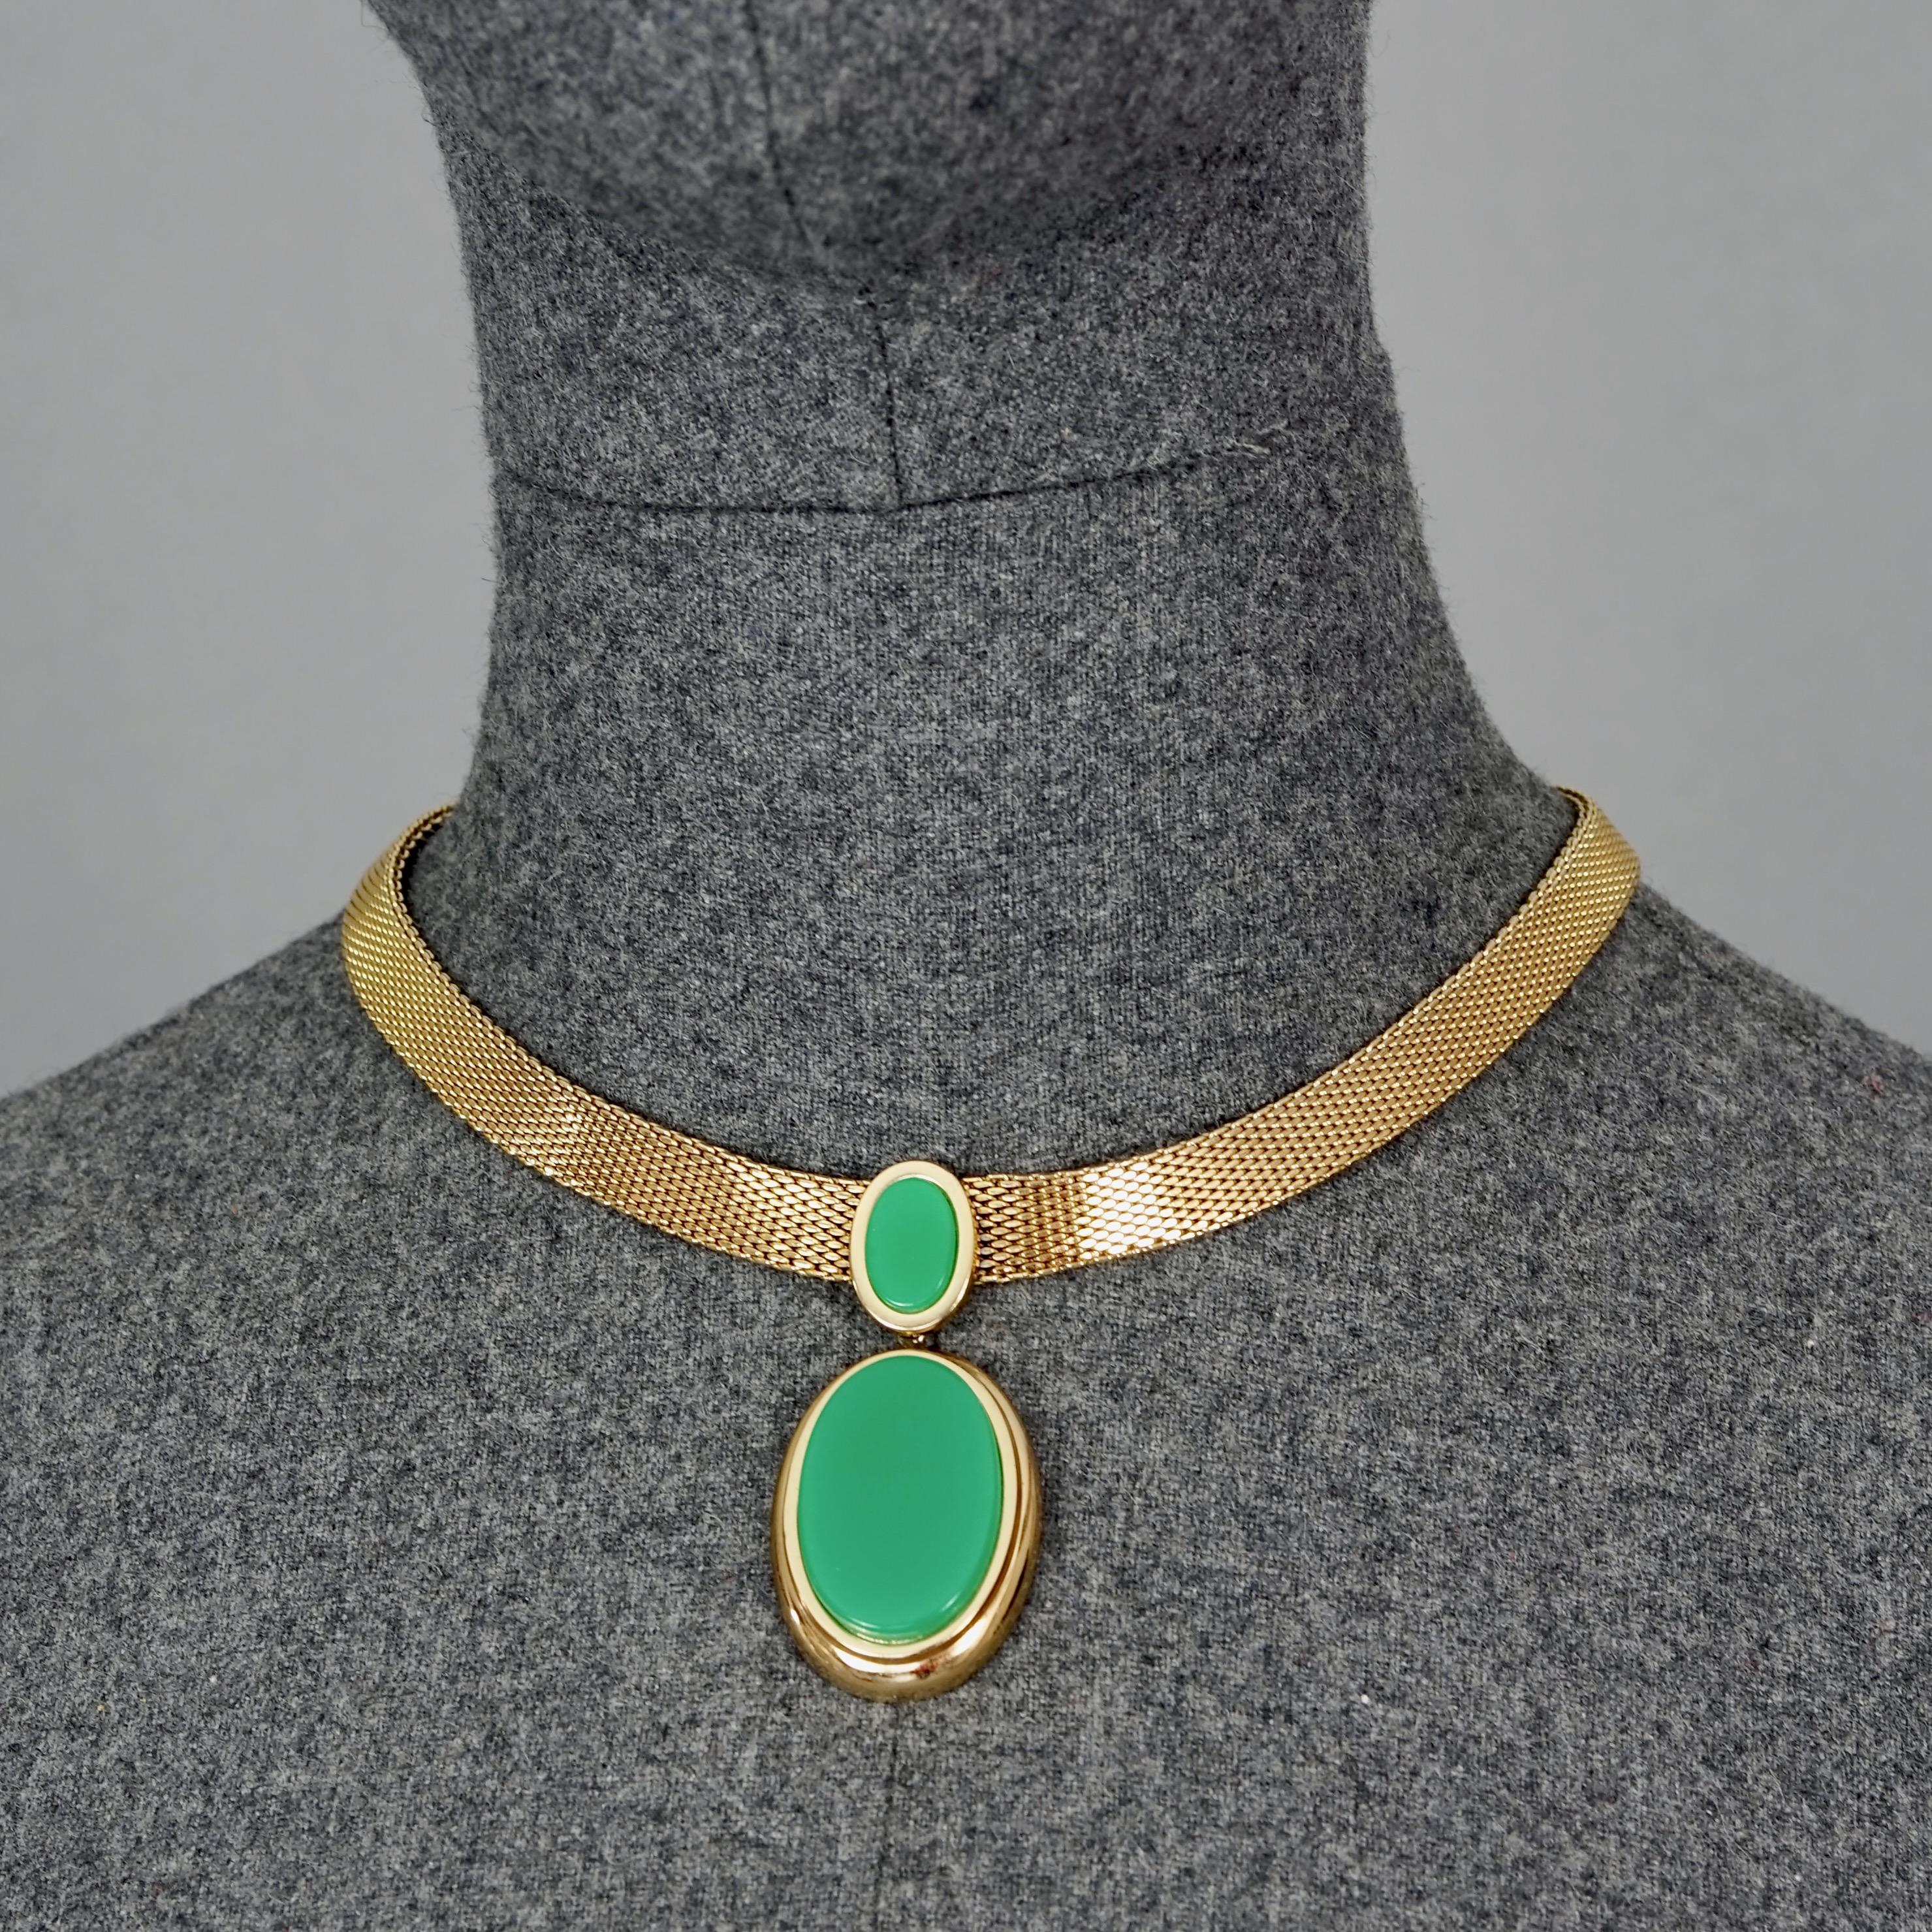 Vintage 1971 CHRISTIAN DIOR Double Oval Green Pendant Chain Necklace

Measurements:
Pendant Height: 2.36 inches (6 cm)
Wearable Length: 15.94 inches until 18.70 inches (40.5 cm until 47.5 cm)

Features:
- 100% Authentic CHRISTIAN DIOR.
- Flat chain